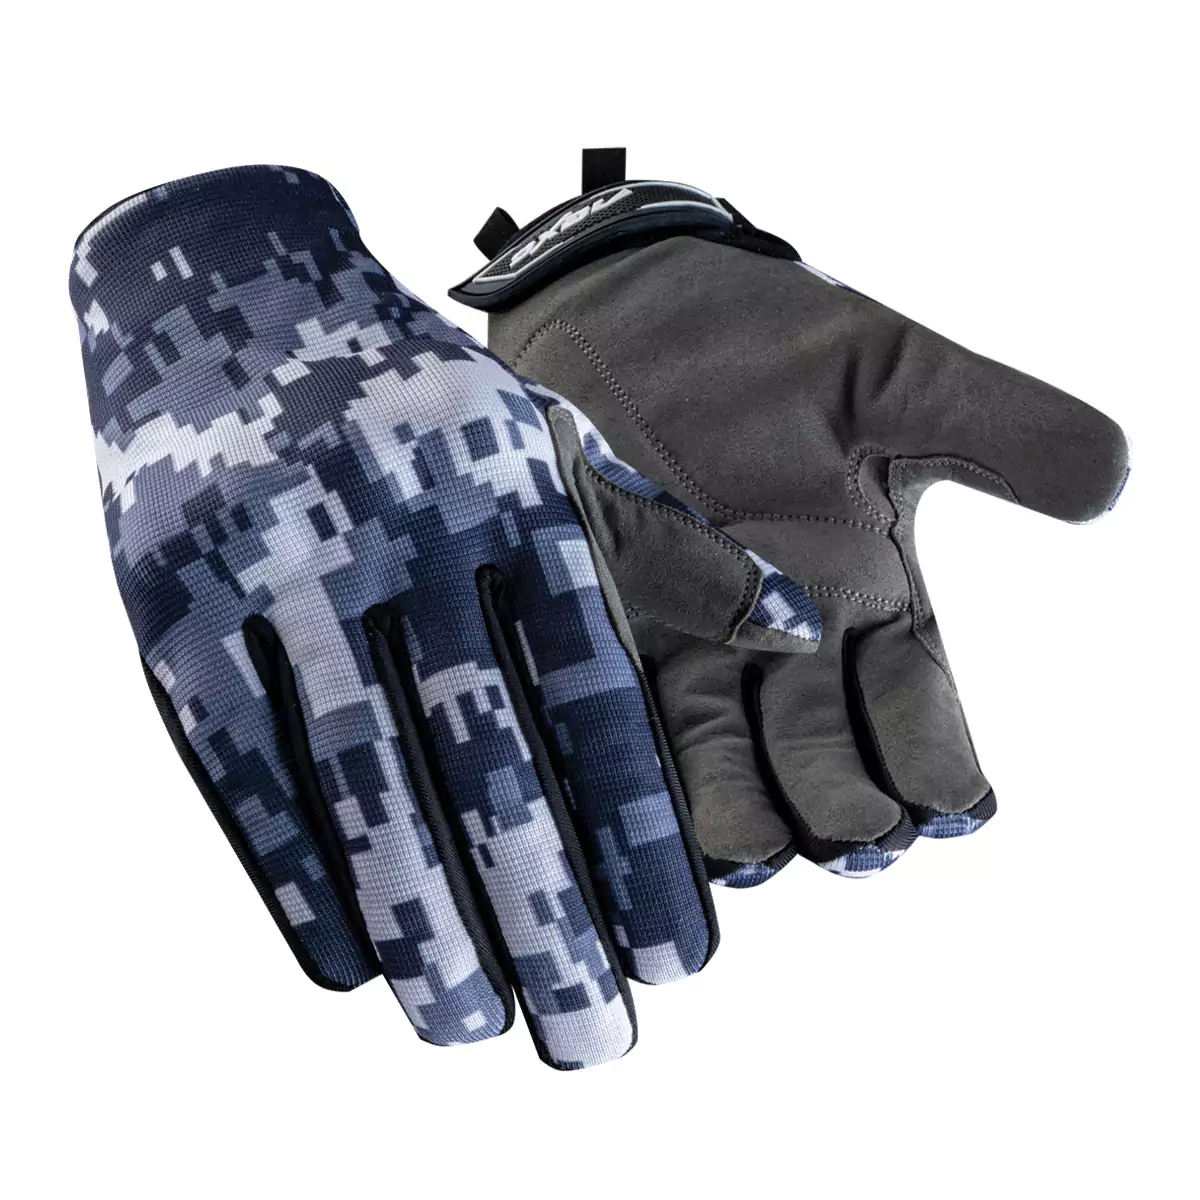 Cafe racer motorcycle gloves designed for style and protection during rides.